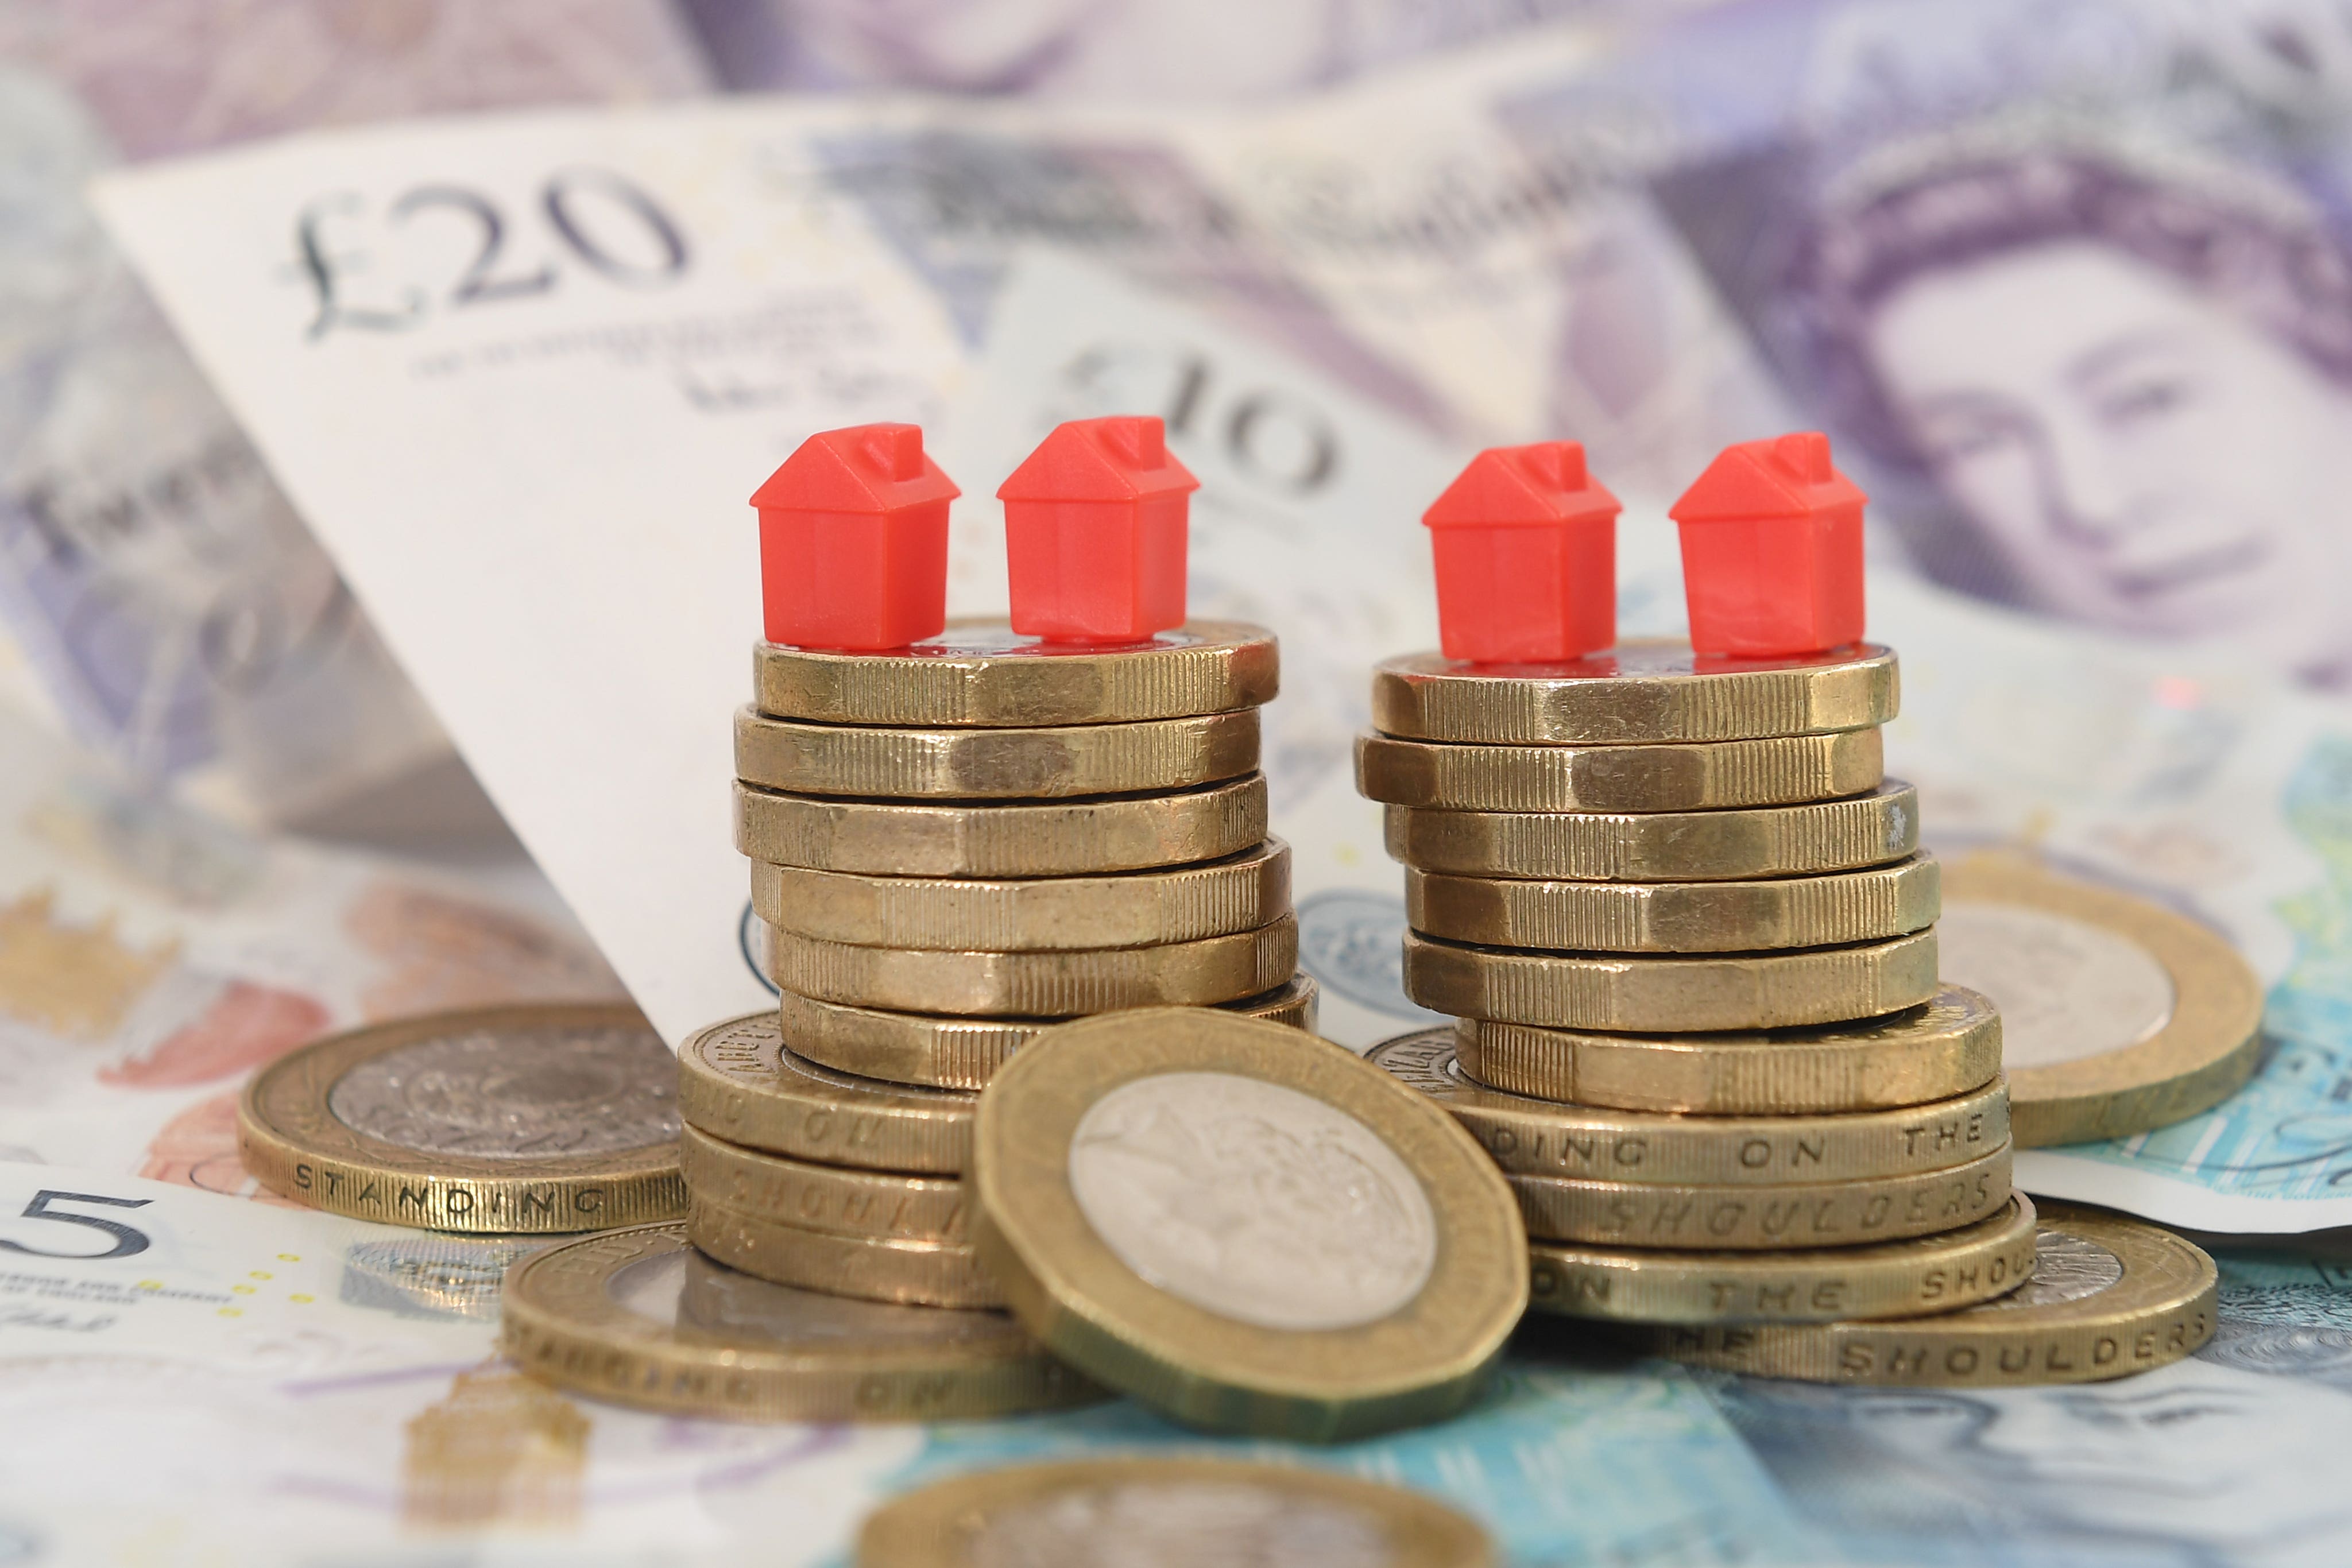 Younger home buyers are being forced to gamble with their retirement prospects by taking on ultra-long mortgages, according to former pensions minister Sir Steve Webb